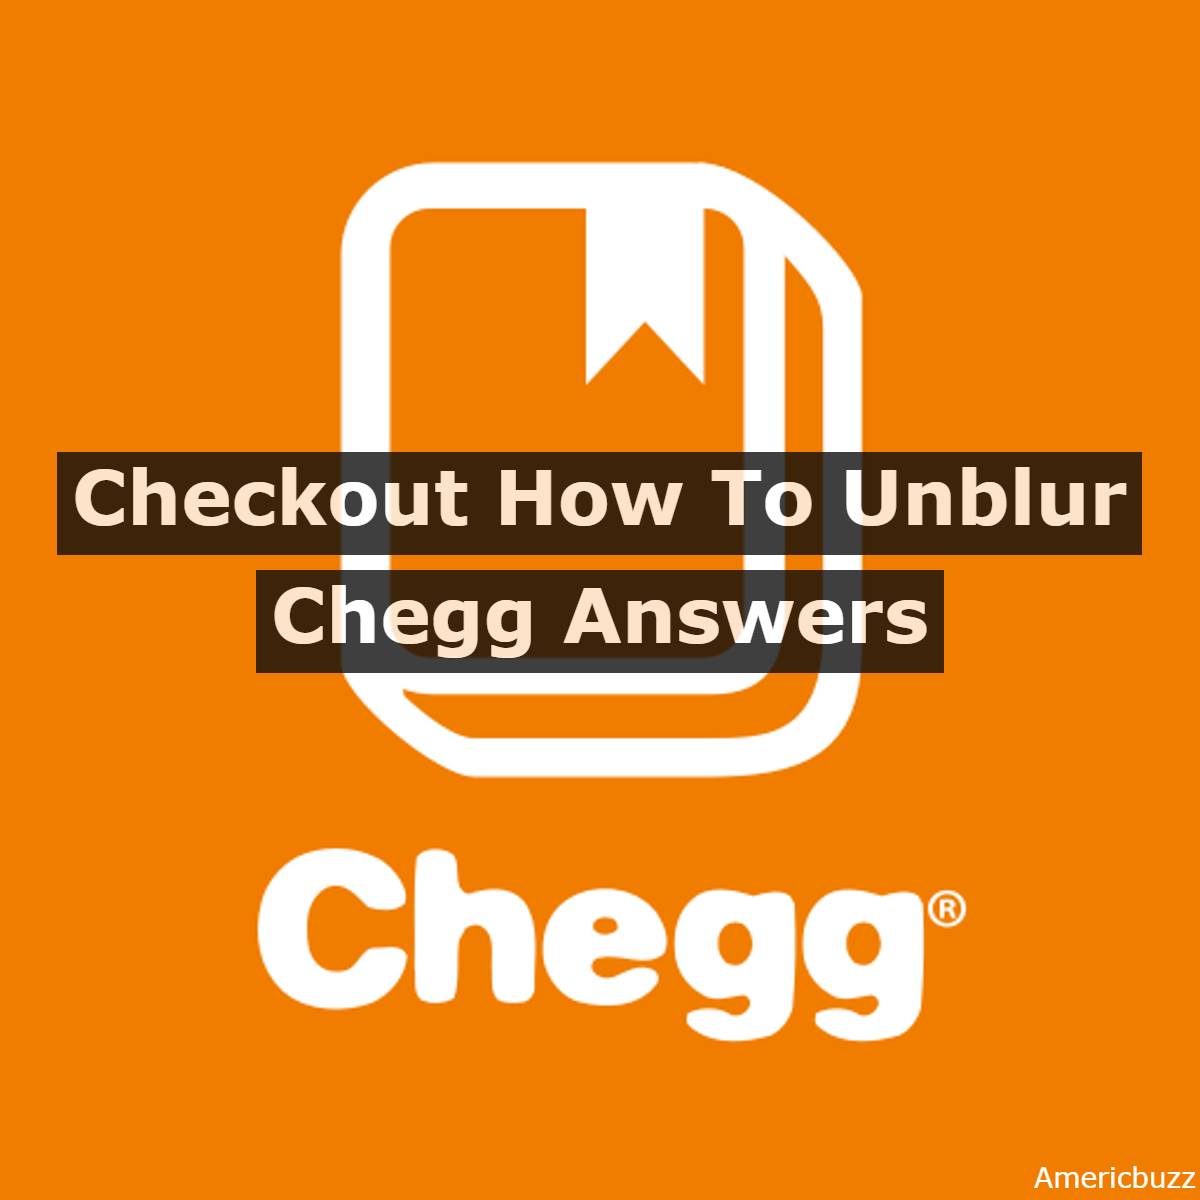 How To Unblur Chegg Answers